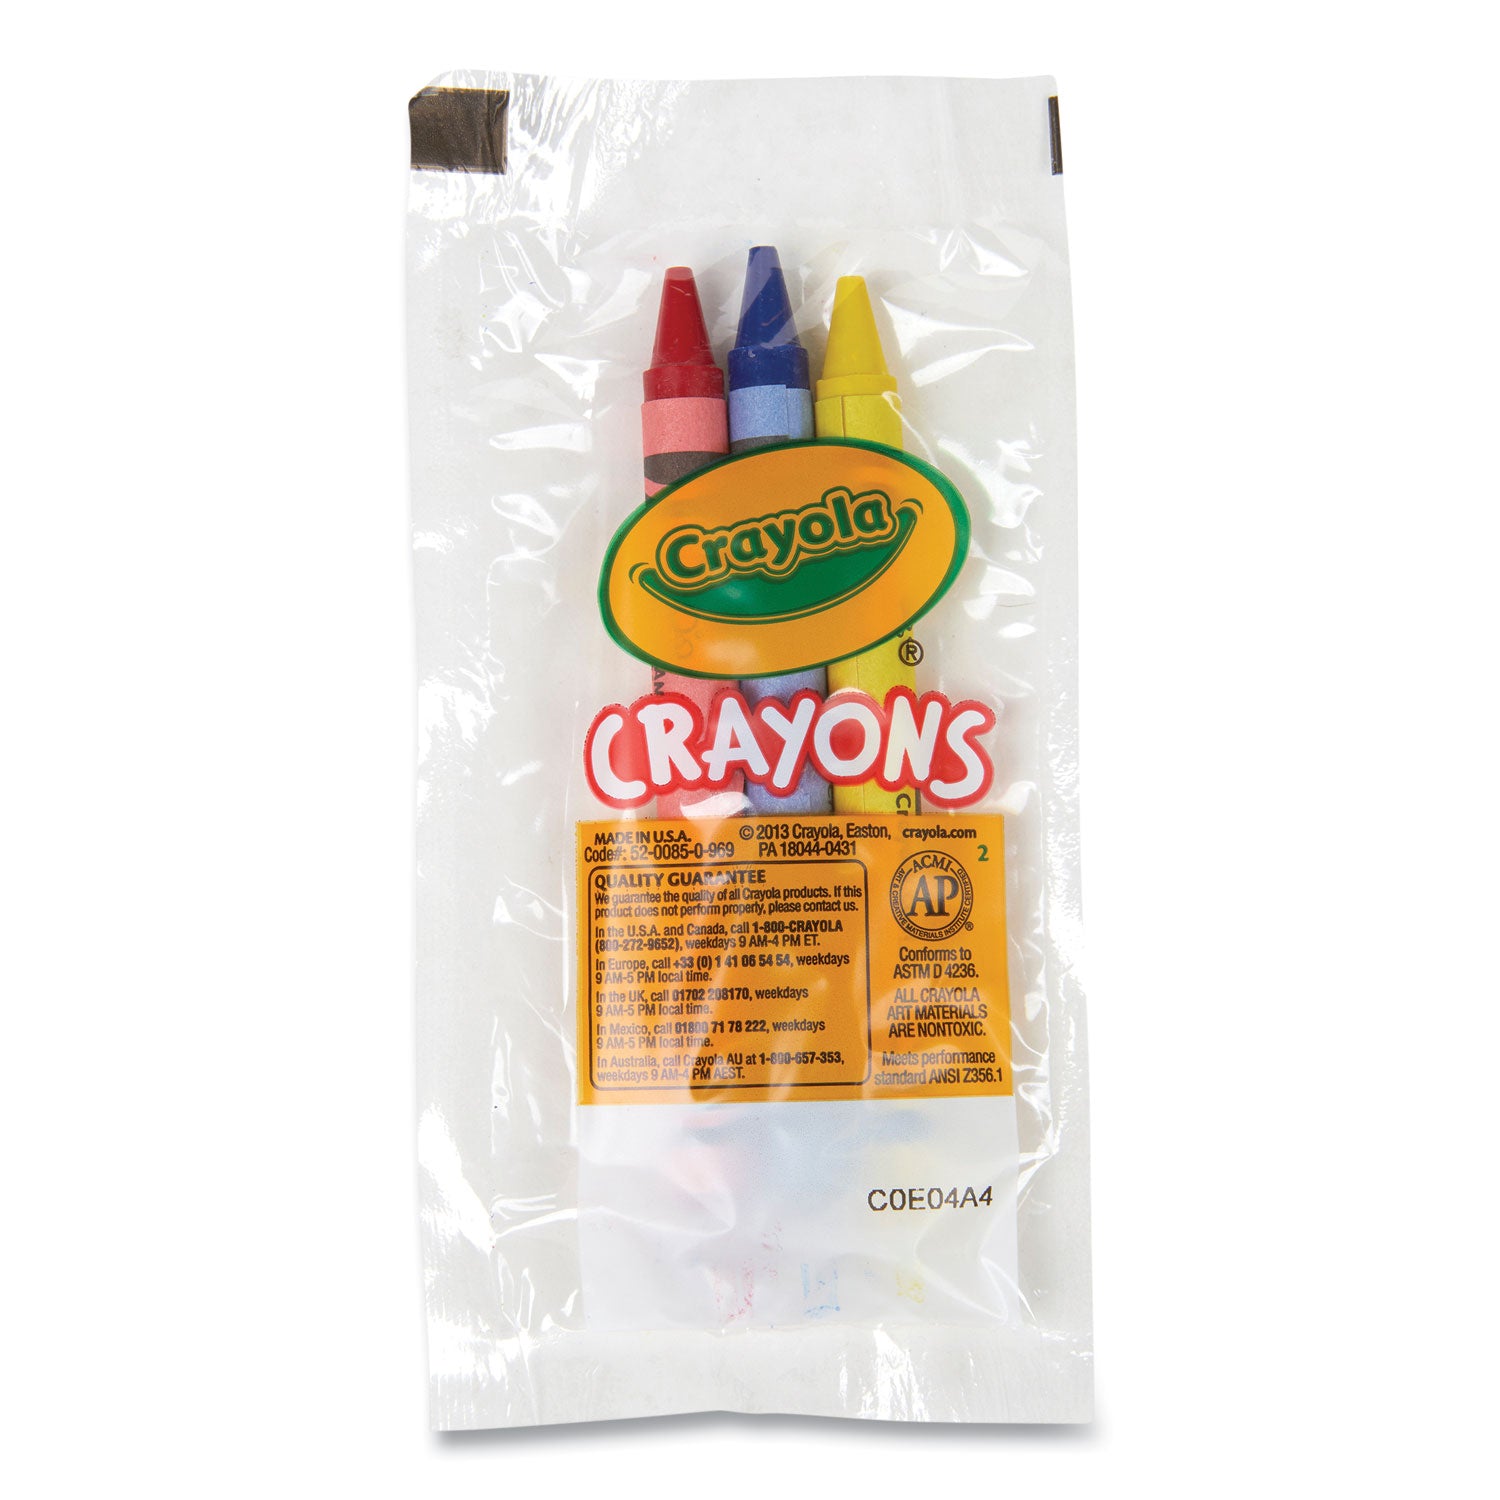 washable-crayons-blue-red-yellow-3-pack-360-packs-carton_cyo520743 - 3